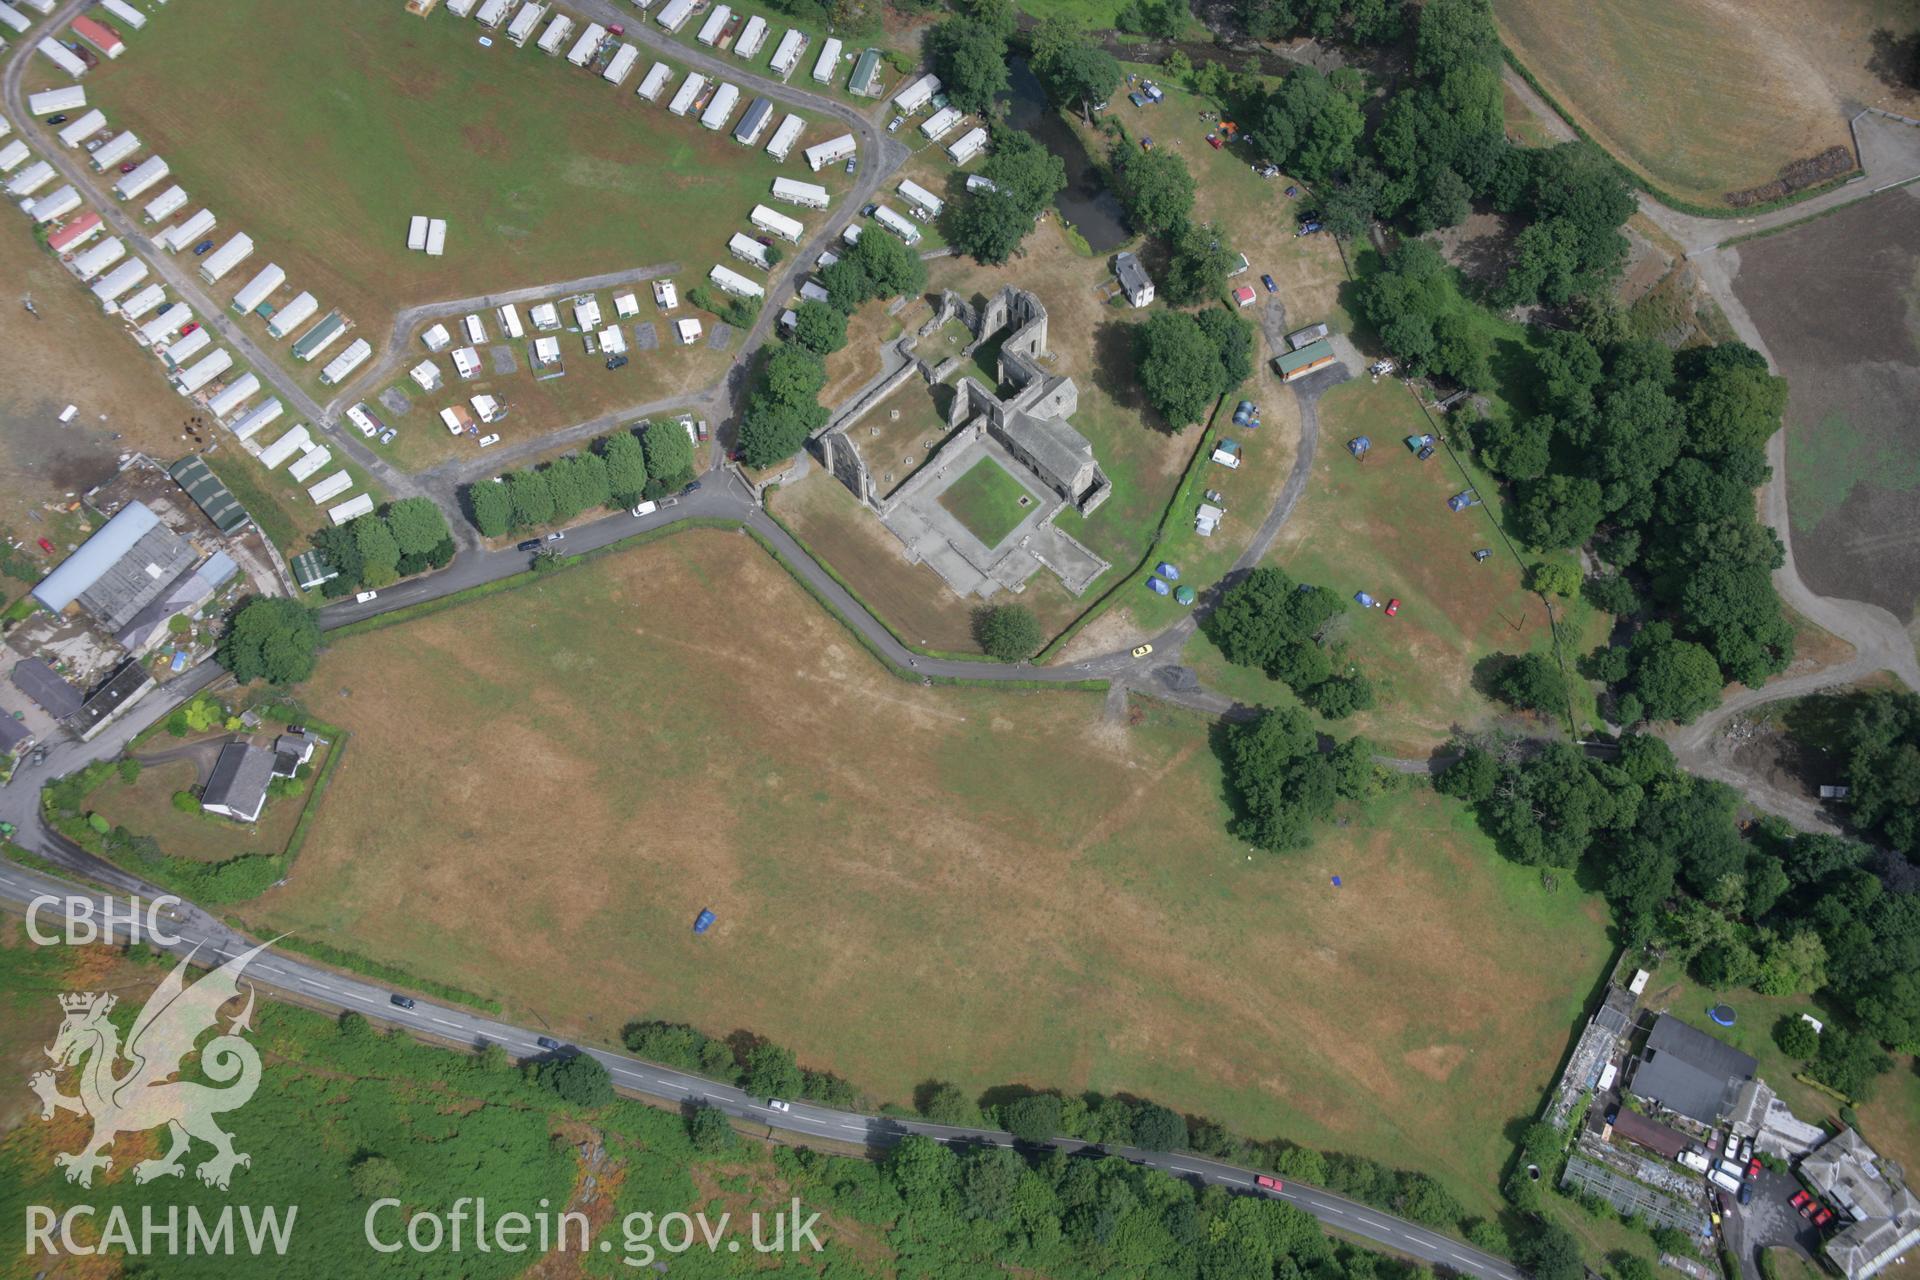 RCAHMW colour oblique aerial photograph of Valle Crucis Abbey showing parchmarks. Taken on 31 July 2006 by Toby Driver.